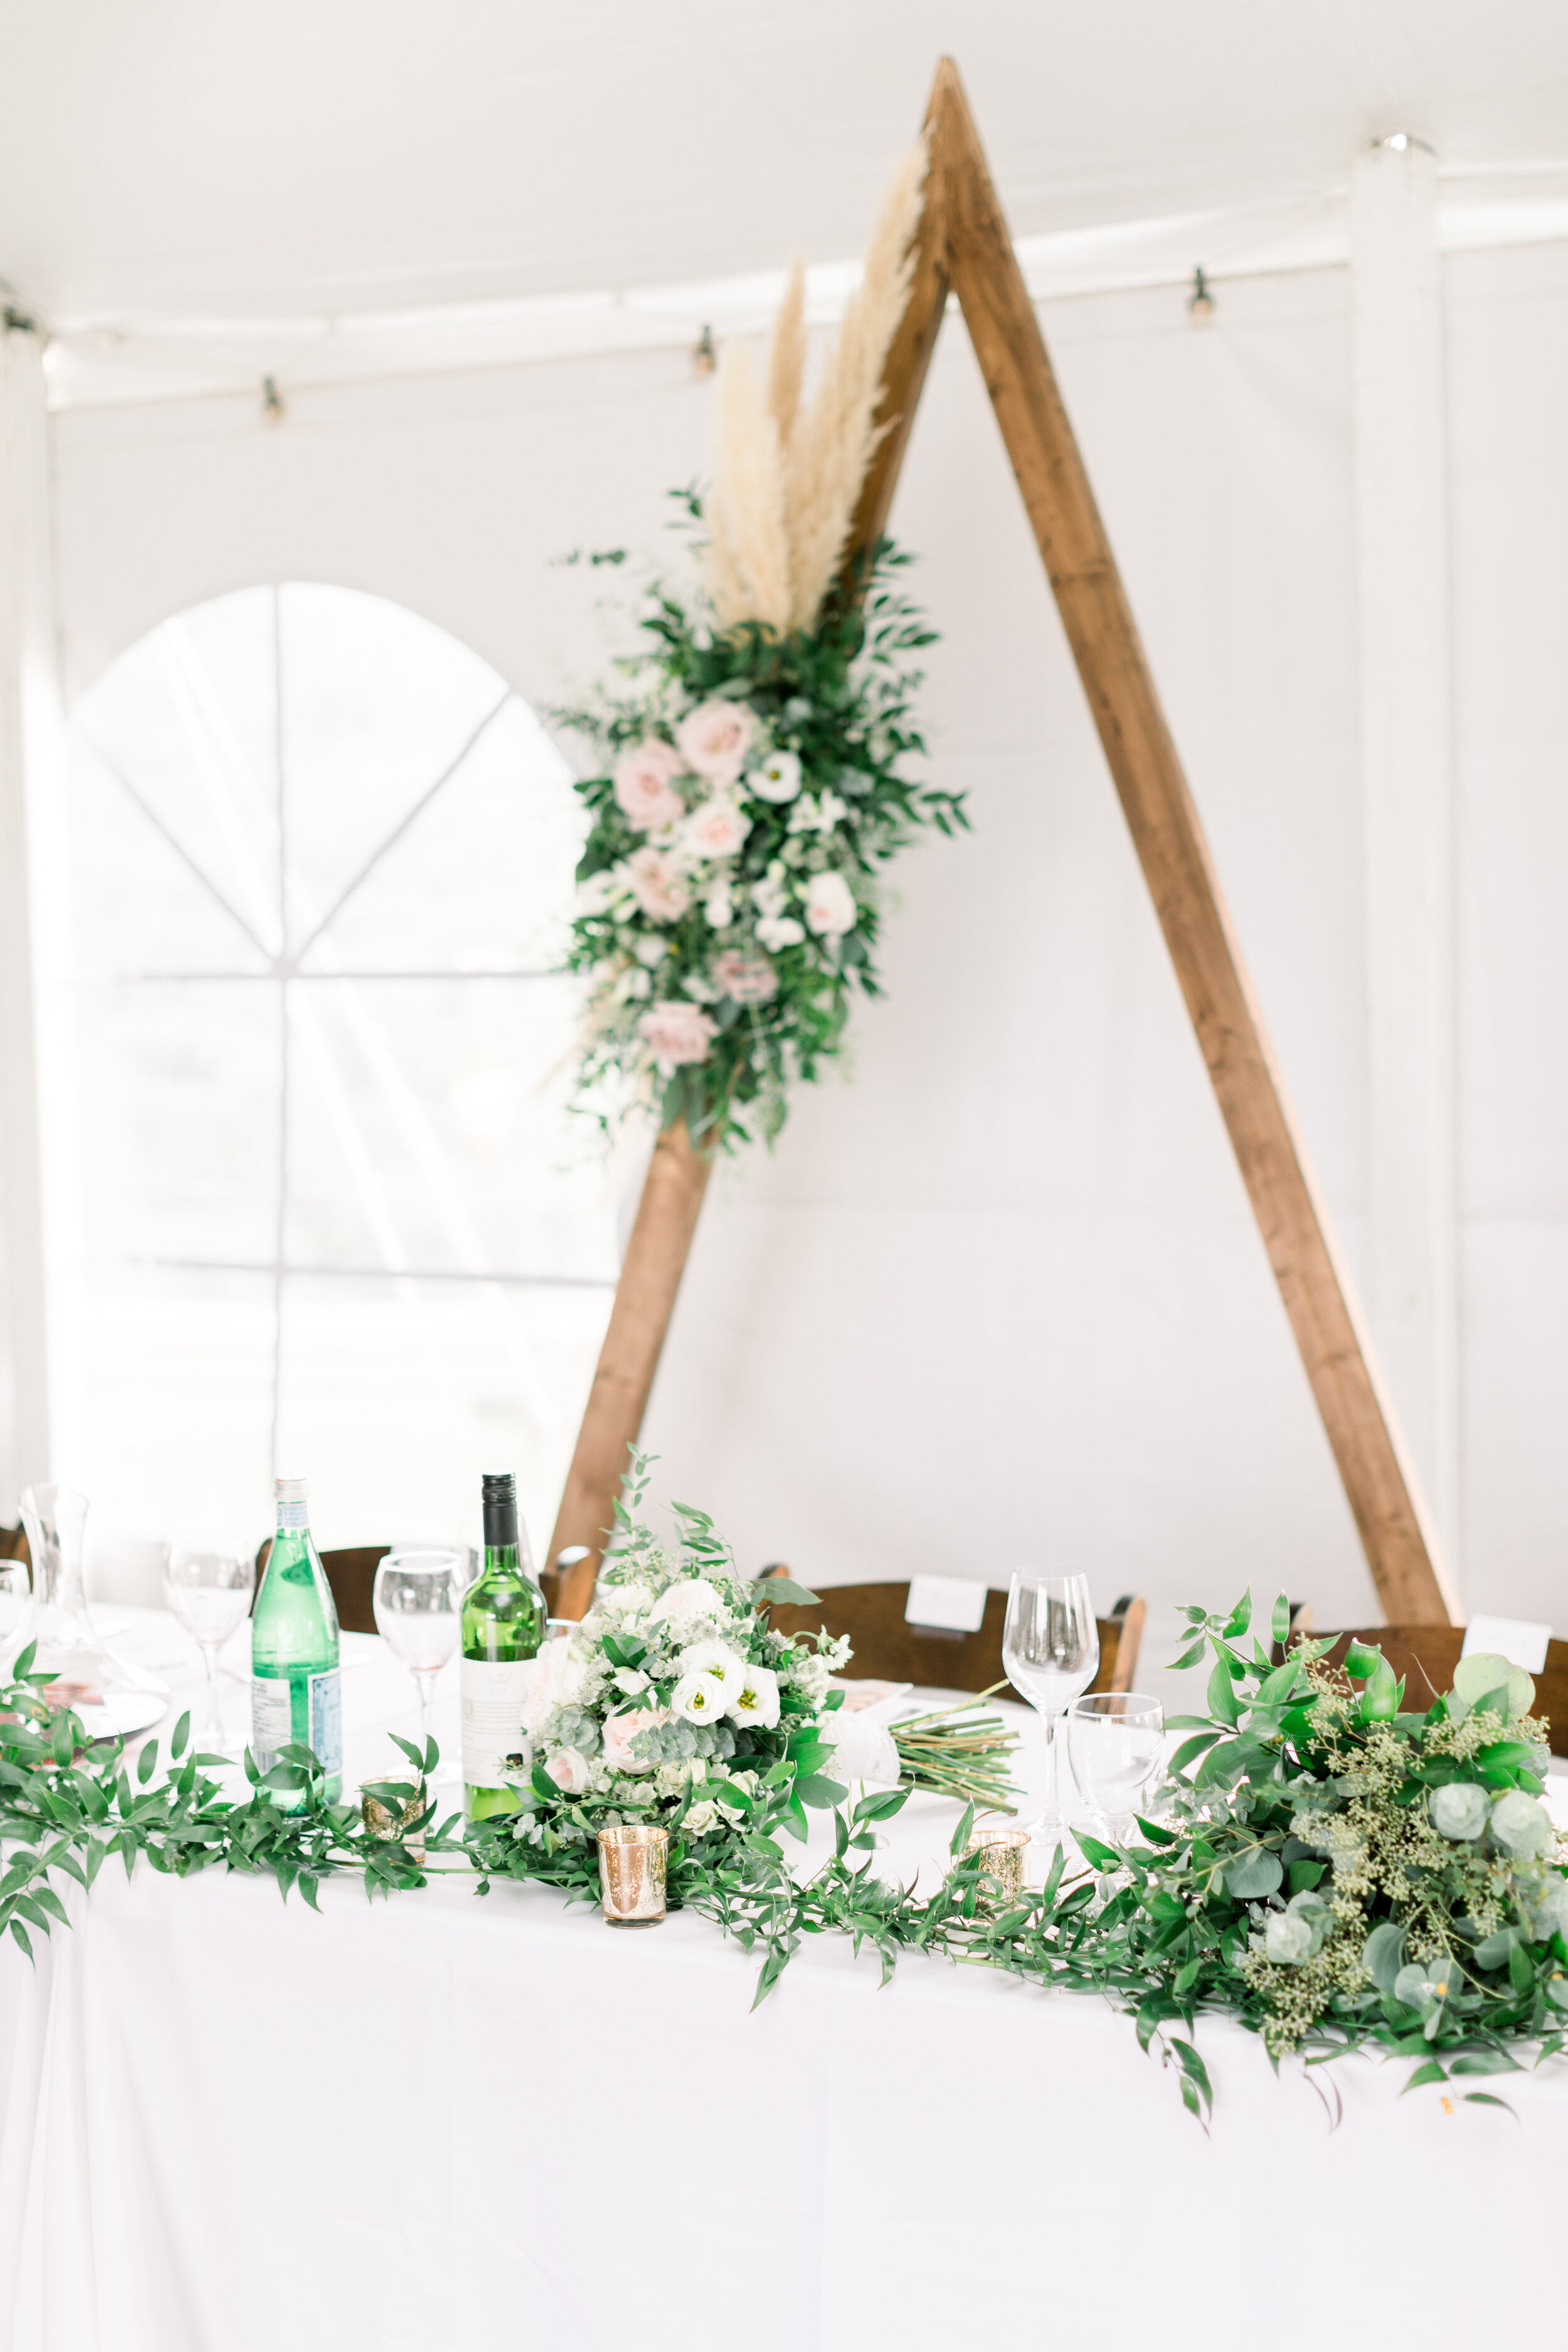  The details of this head table were captured perfectly by Chelsea Mason Photography at a beautiful Kinmount, Ontario wedding. Head tablescape details floral wedding centerpieces greenery place settings wine glass gold candles wedding day details pic